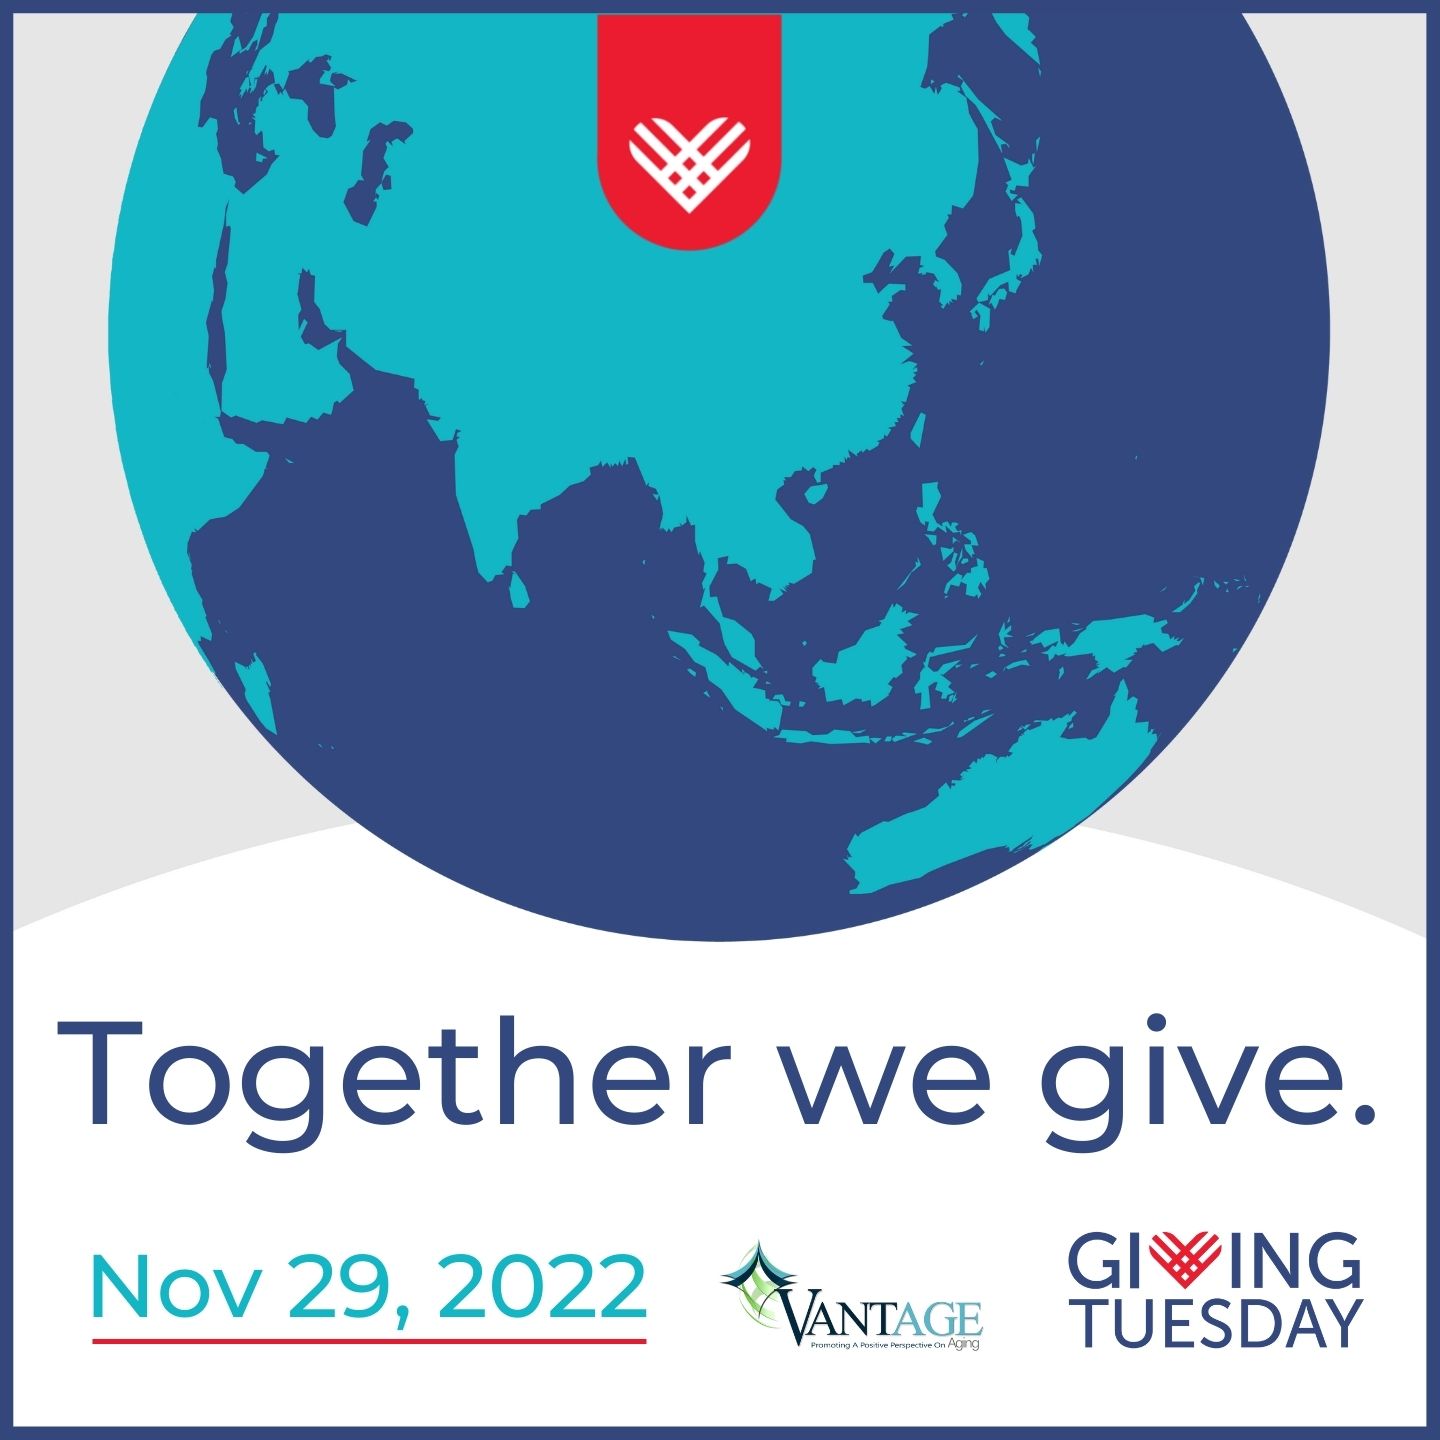 Giving Tuesday – Talent and Time are as Important as Treasure This Year